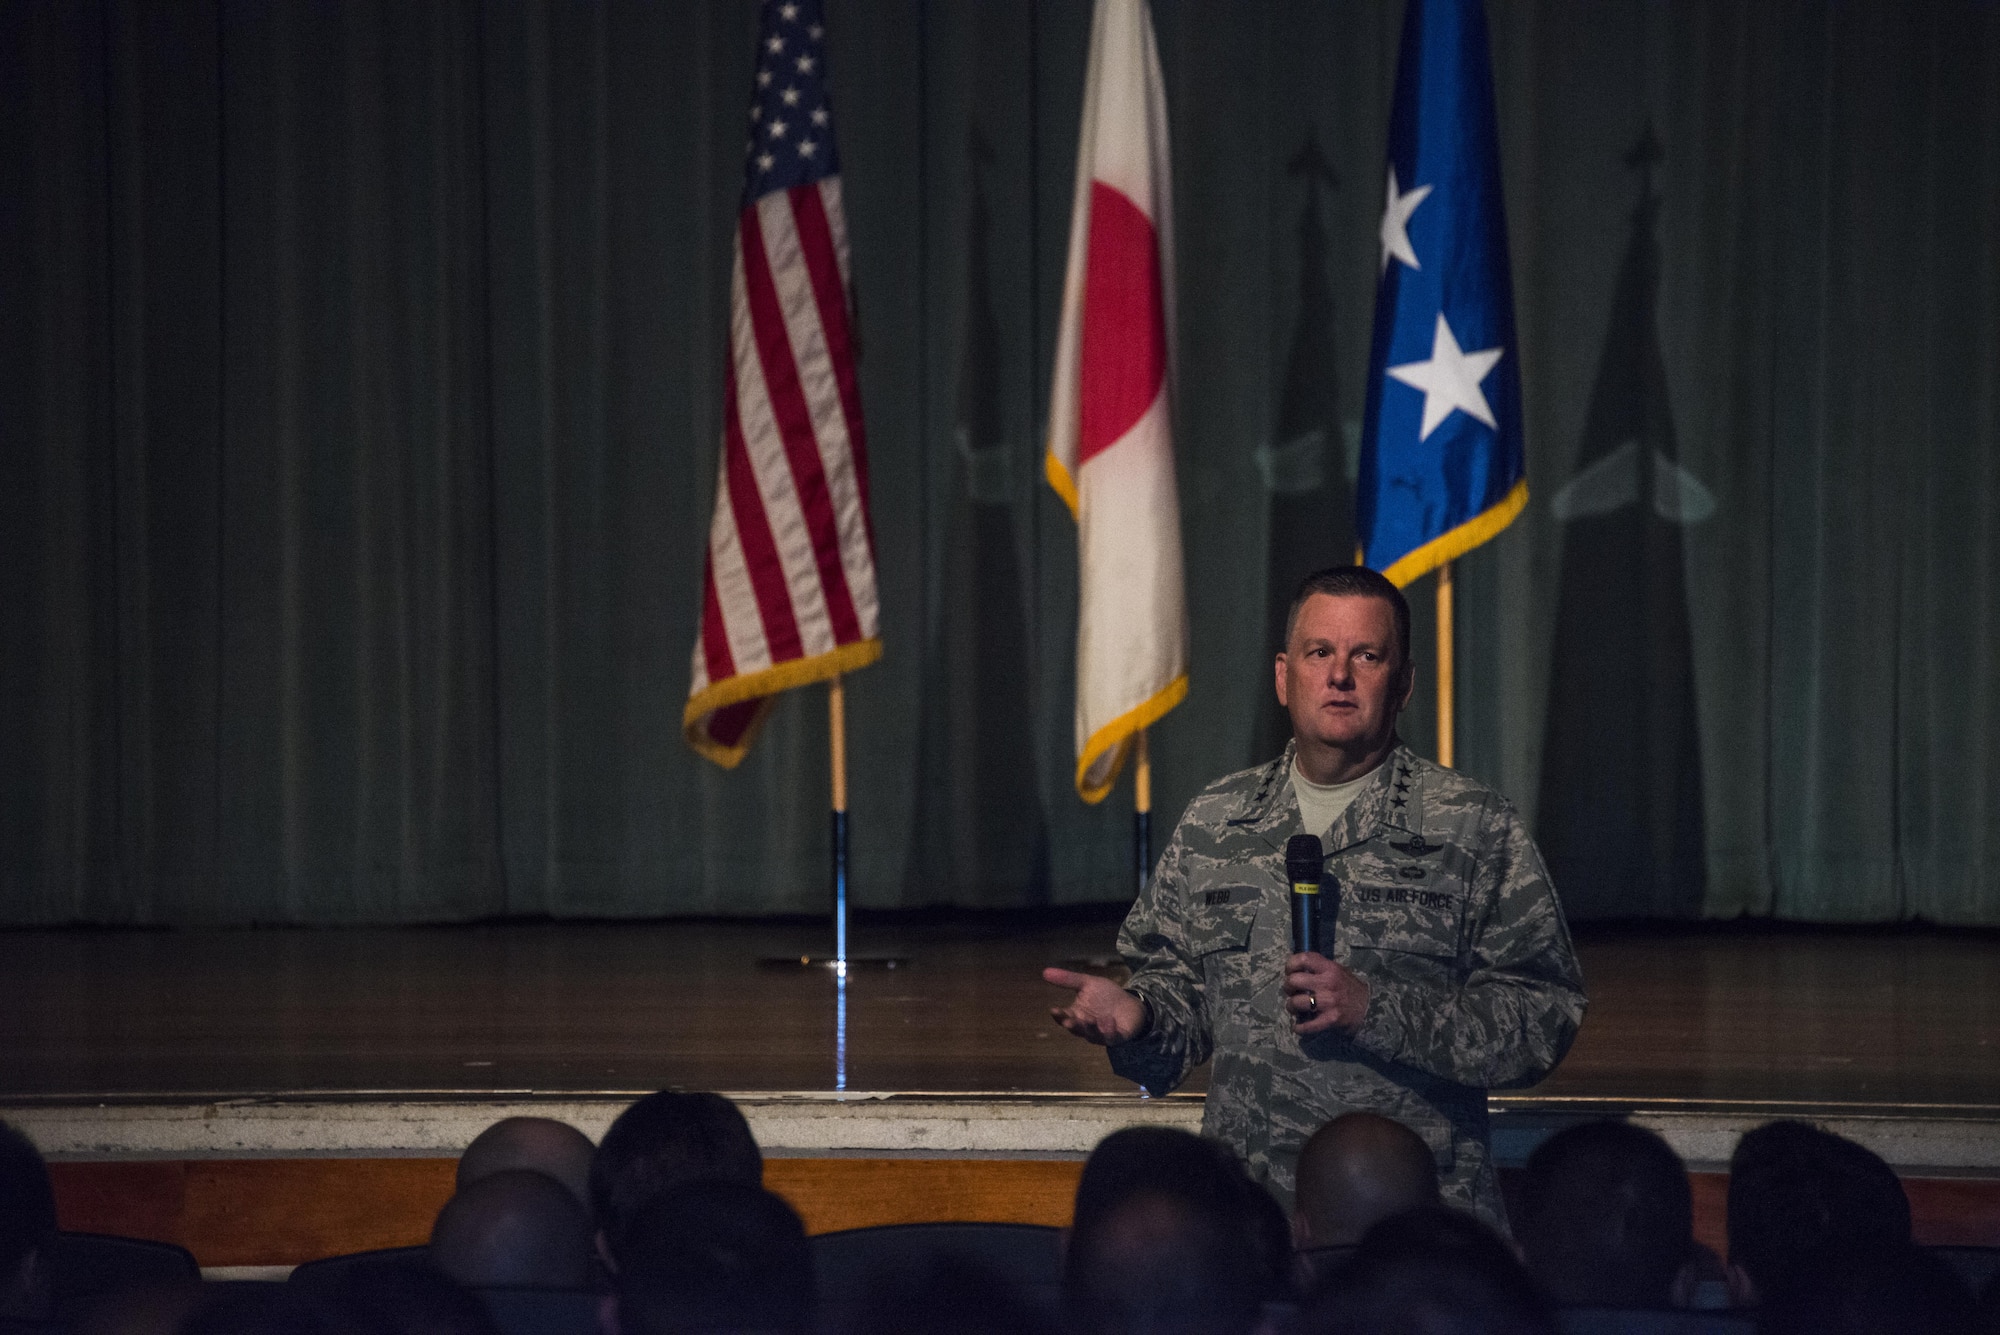 U.S. Air Force Lt. Gen. Brad Webb, commander of Air Force Special Operations Command, addresses members of the 353rd Special Operations Group at an Airman all-call, Nov. 7, 2016, at Kadena Air Base, Okinawa, Japan. As a part of his first Indo-Asia-Pacific tour since taking command, Webb took the time to meet with the Air Commandos and thank them for their service and sacrifice. (U.S. Air Force photo by Capt. Jessica Tait)